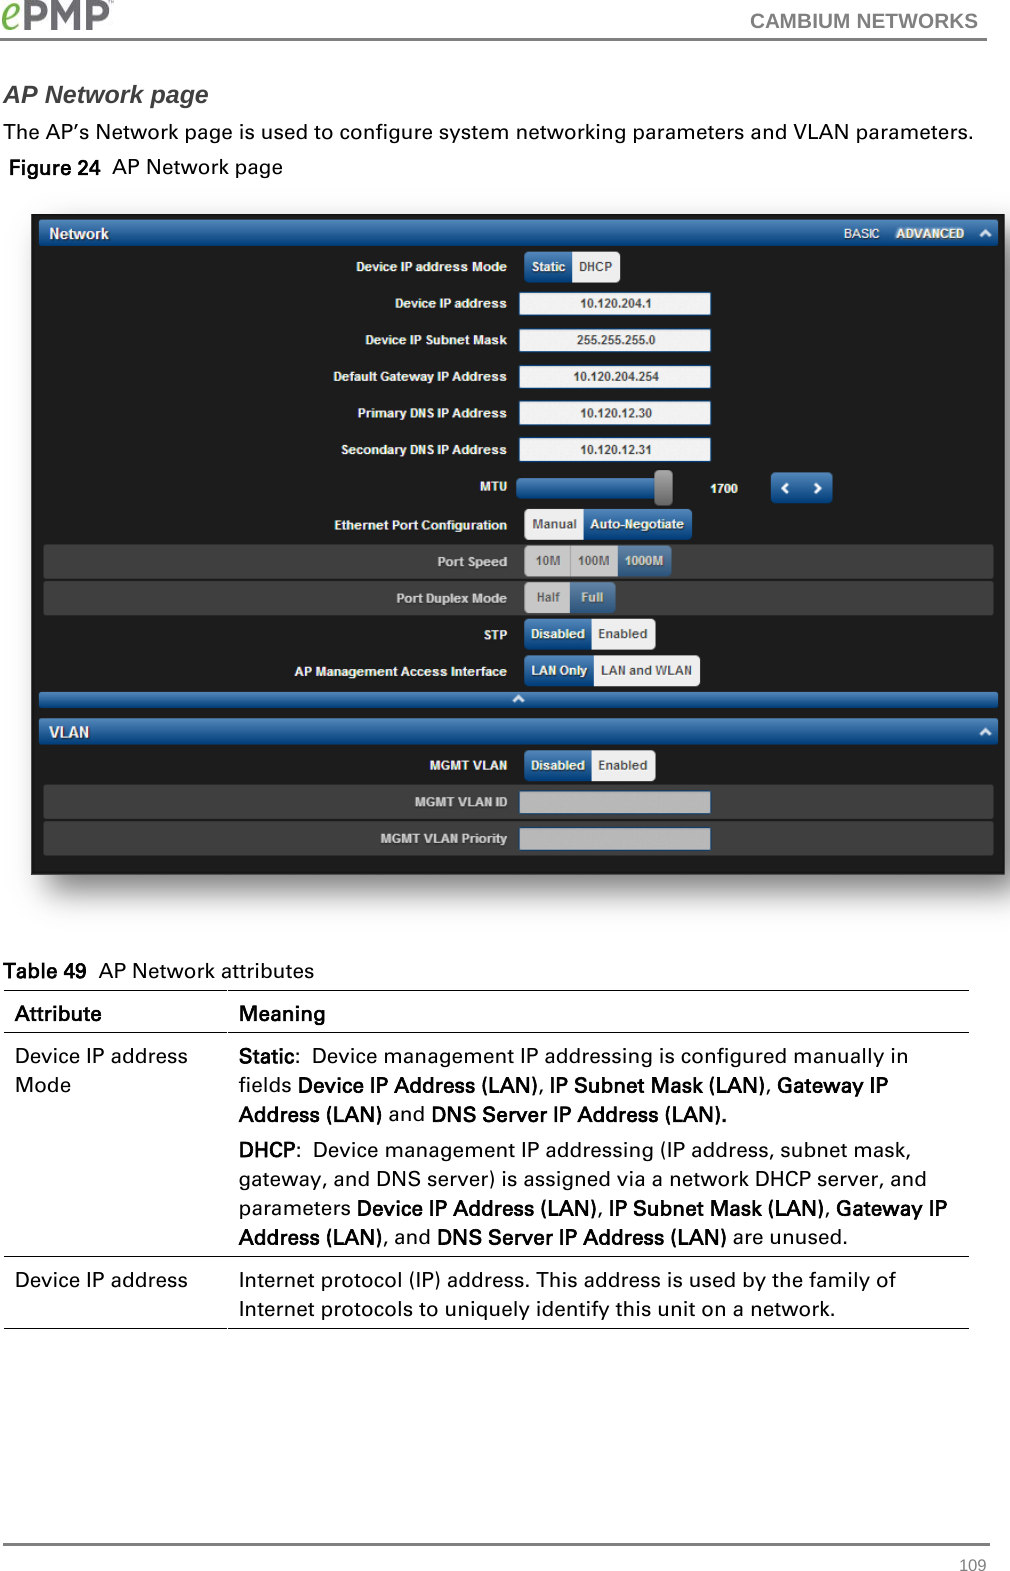 CAMBIUM NETWORKS  AP Network page The AP’s Network page is used to configure system networking parameters and VLAN parameters.  Figure 24  AP Network page  Table 49  AP Network attributes Attribute Meaning Device IP address Mode Static:  Device management IP addressing is configured manually in fields Device IP Address (LAN), IP Subnet Mask (LAN), Gateway IP Address (LAN) and DNS Server IP Address (LAN). DHCP:  Device management IP addressing (IP address, subnet mask, gateway, and DNS server) is assigned via a network DHCP server, and parameters Device IP Address (LAN), IP Subnet Mask (LAN), Gateway IP Address (LAN), and DNS Server IP Address (LAN) are unused. Device IP address Internet protocol (IP) address. This address is used by the family of Internet protocols to uniquely identify this unit on a network.  109 